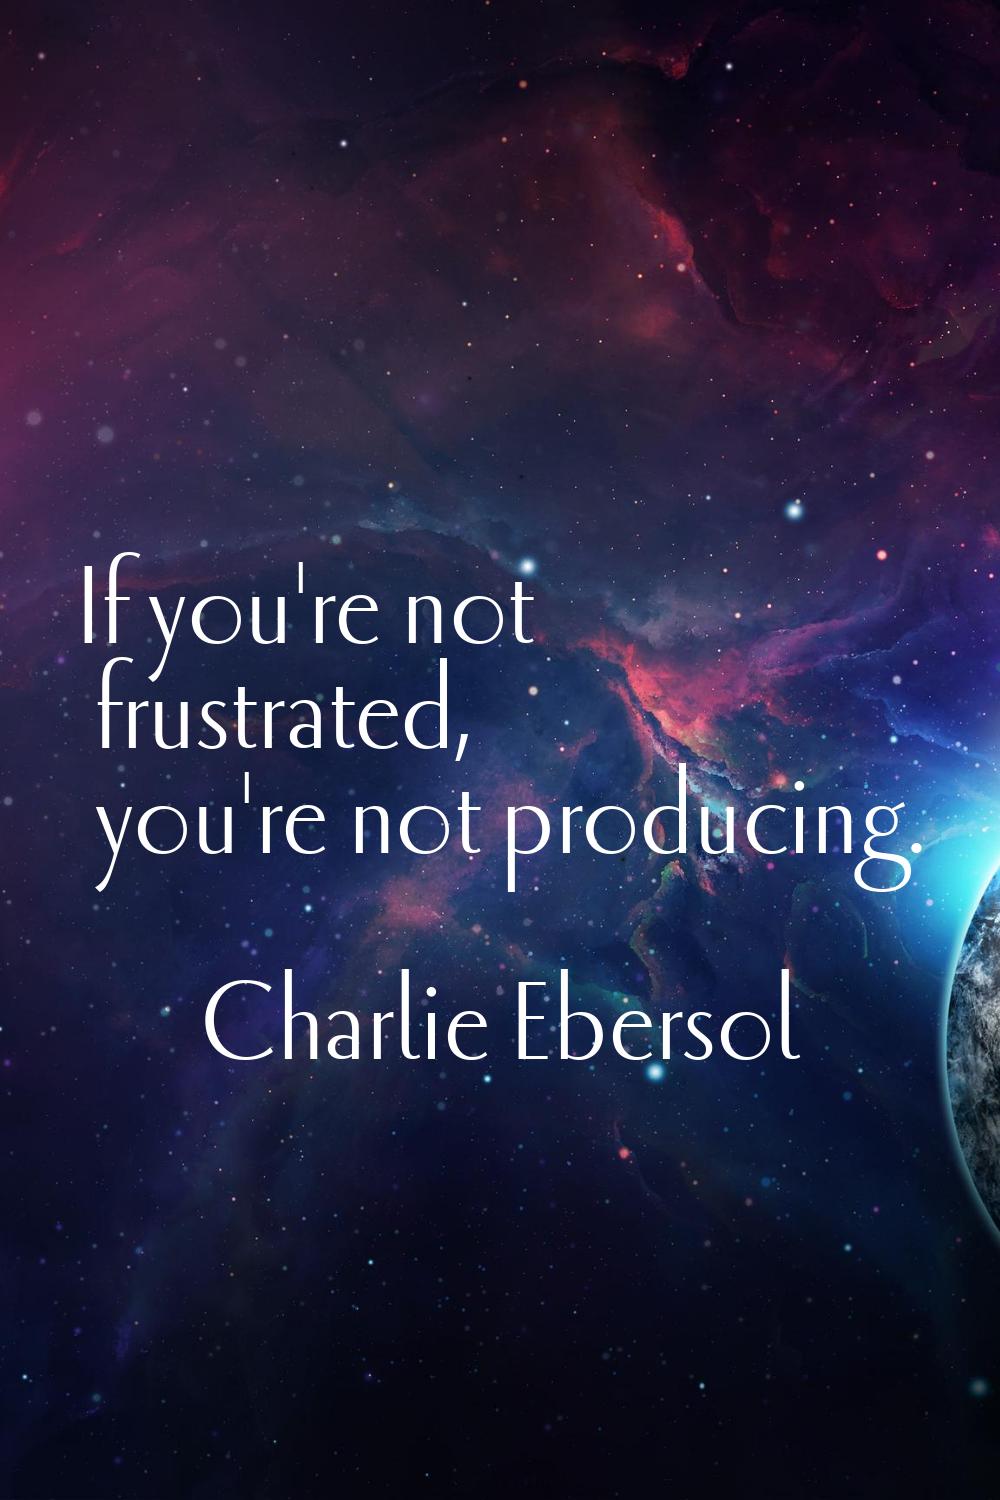 If you're not frustrated, you're not producing.